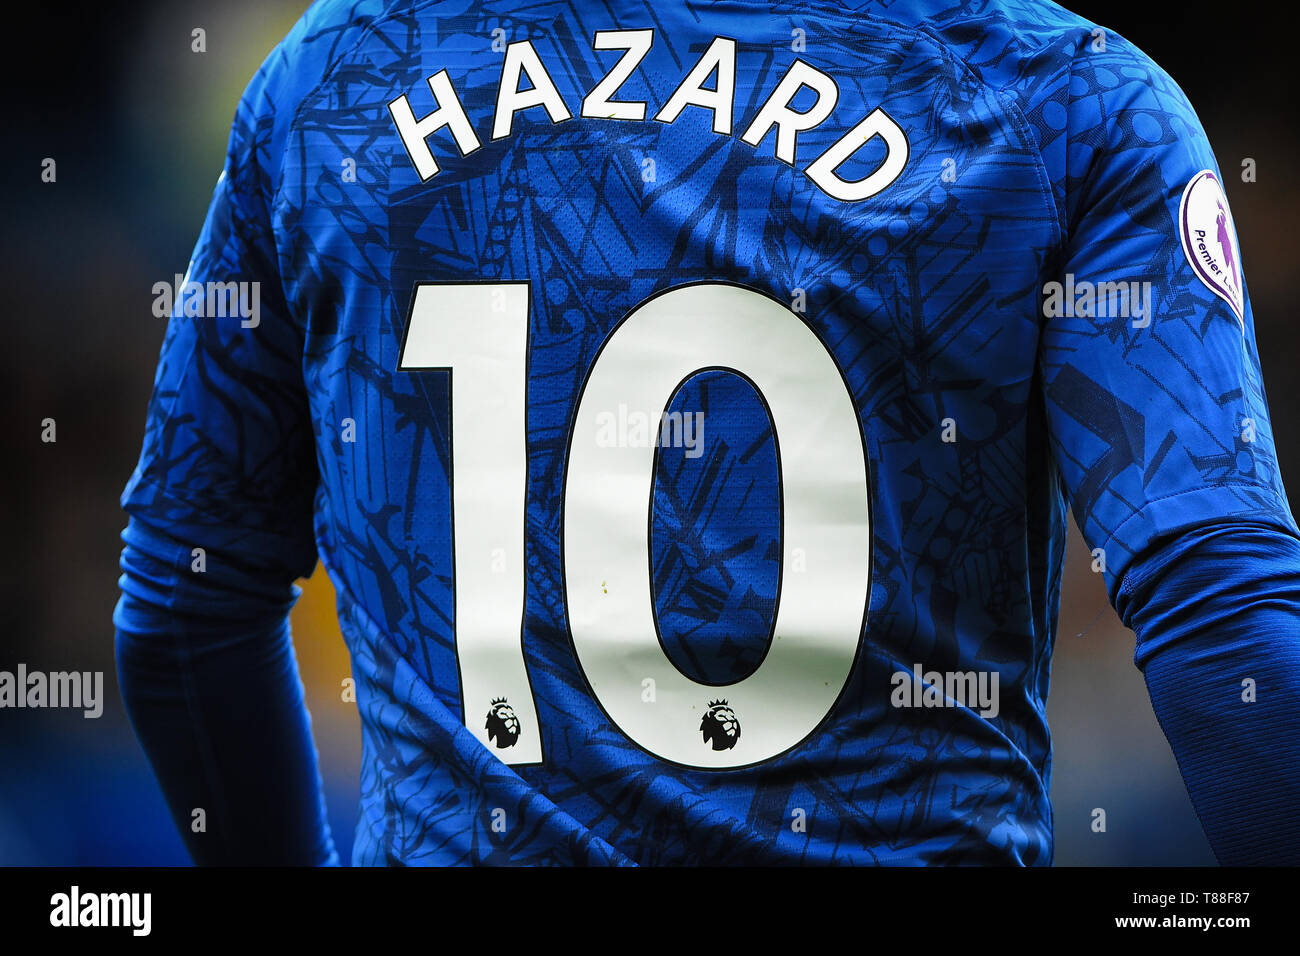 Eden chelsea shirt stock photography and images - Alamy